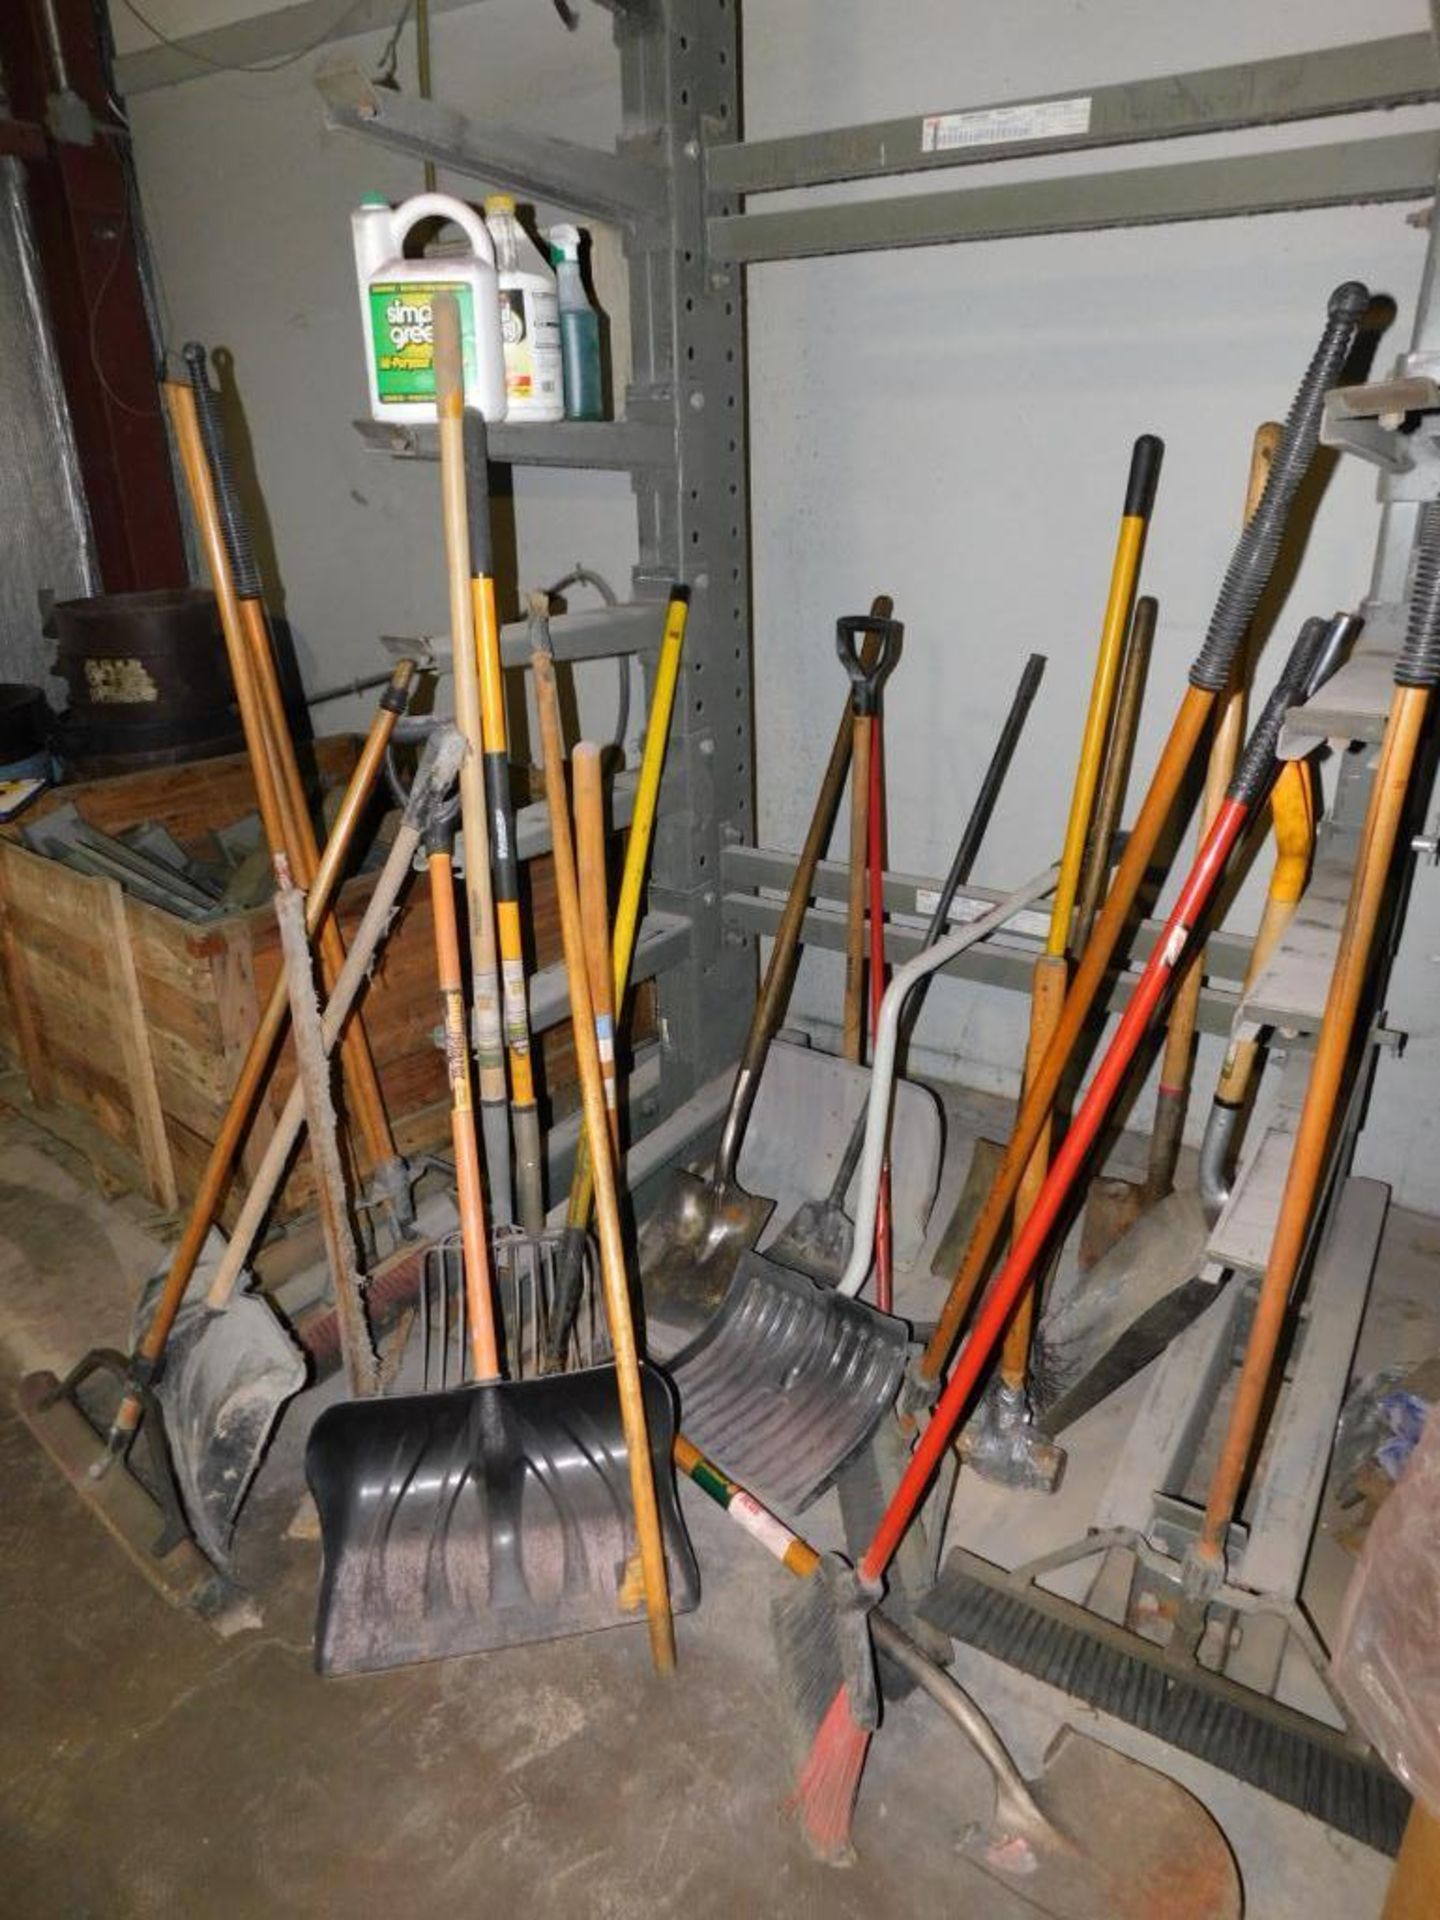 LOT: Large Quantity of Cleaning Tools including Brooms, Shovels, Pitchforks, Pick Axe, Scraper, etc.